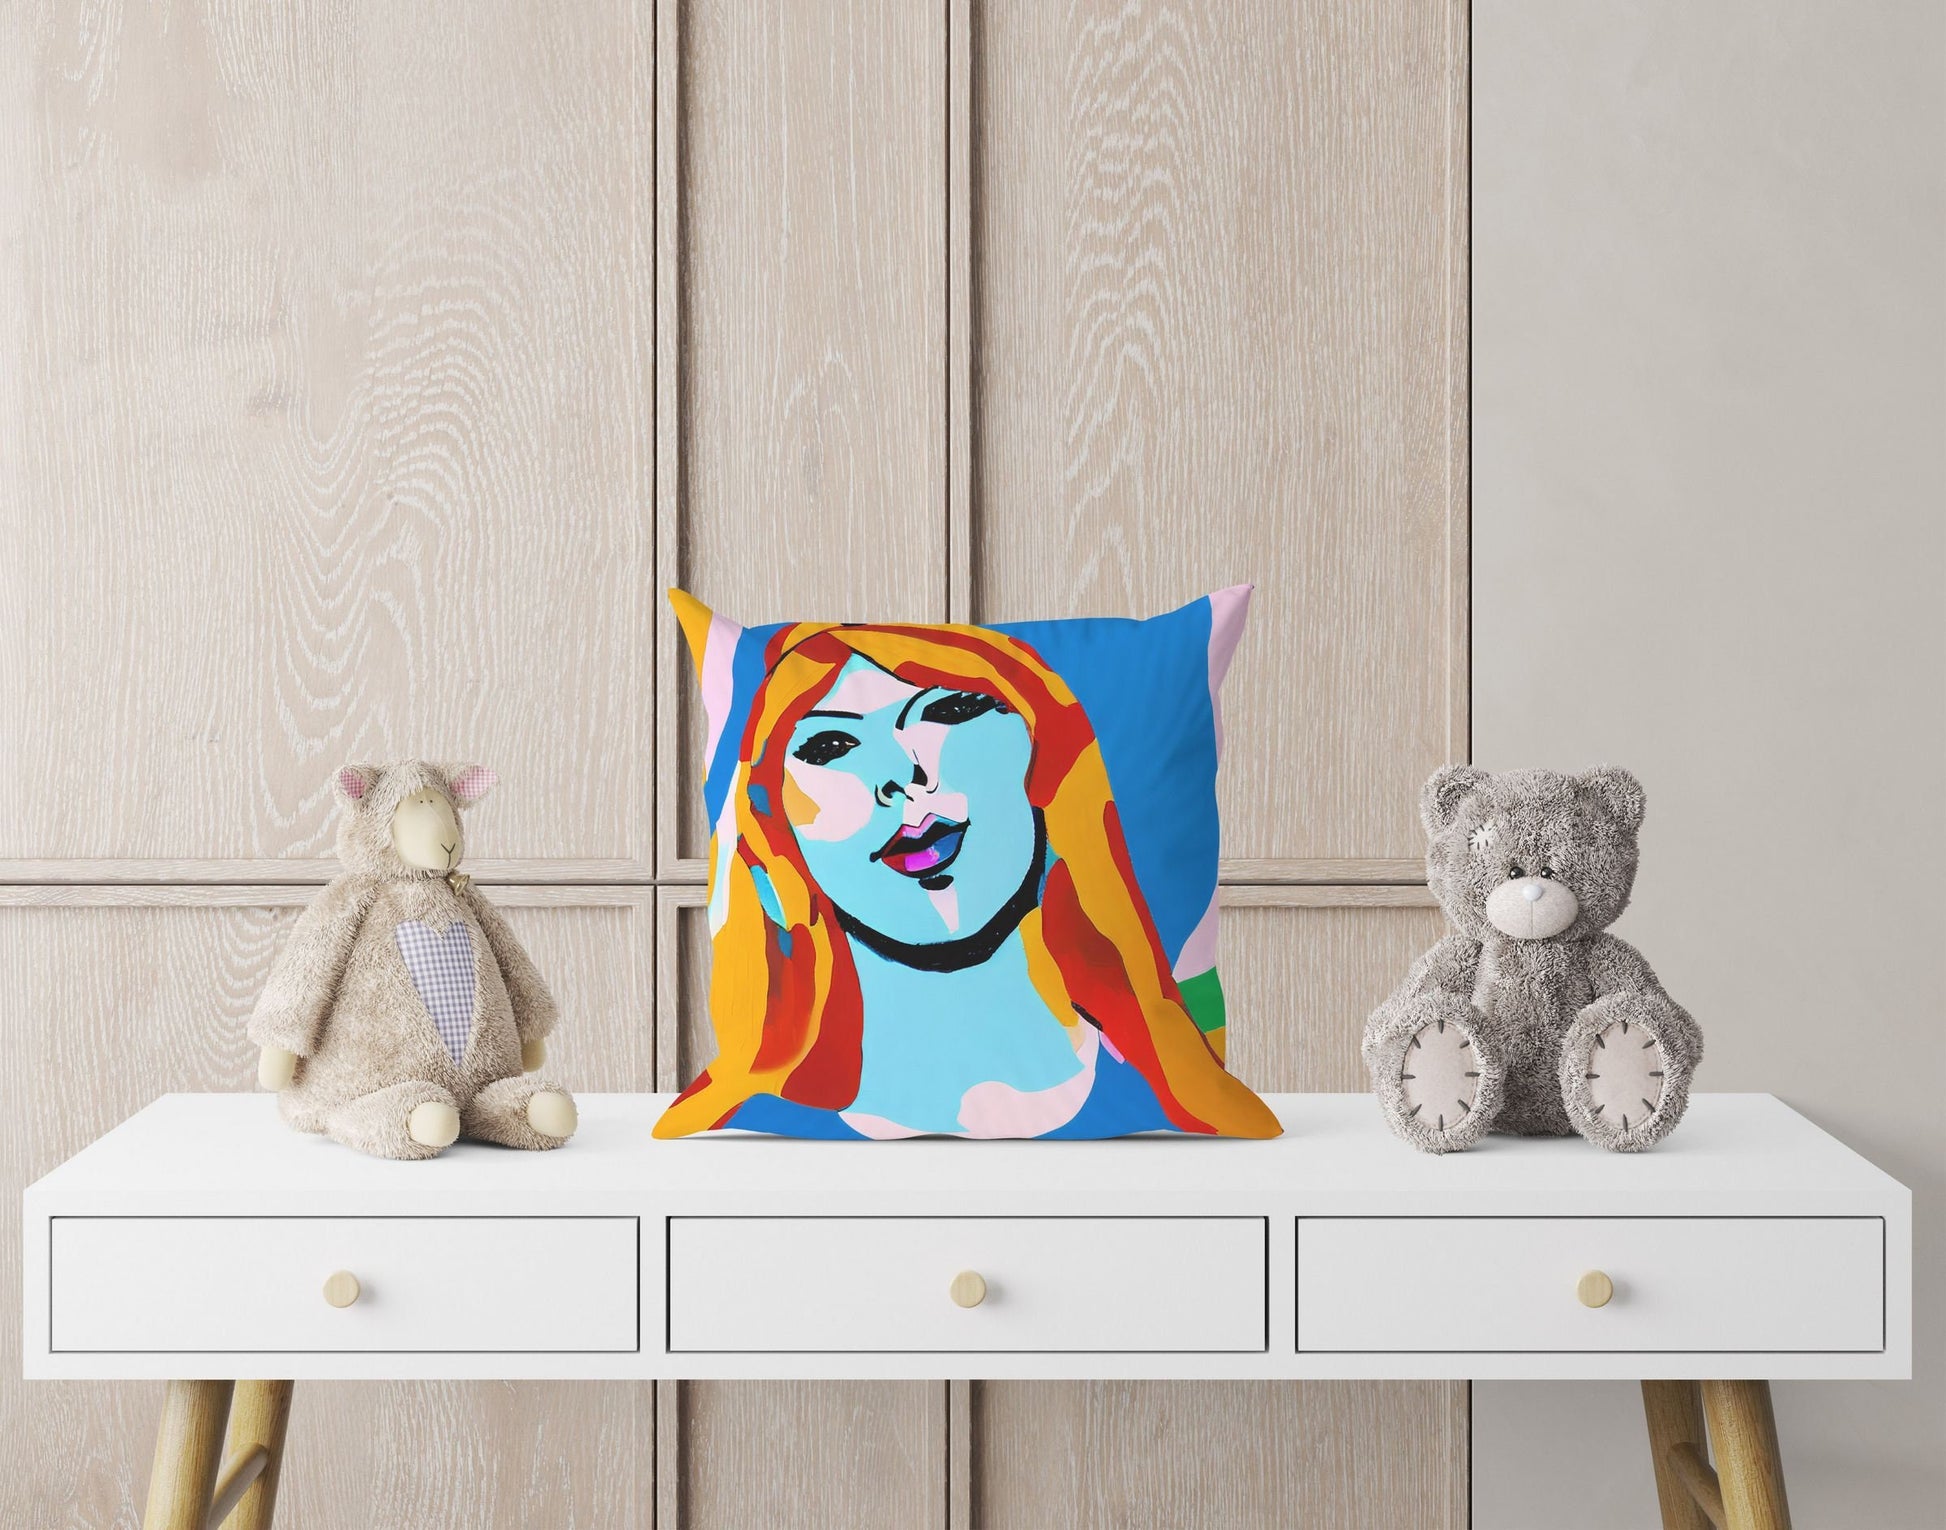 Taylor Swift Tapestry Pillows, Abstract Throw Pillow Cover, Artist Pillow, Colorful Pillow Case, Large Pillow Cases, Holiday Gift